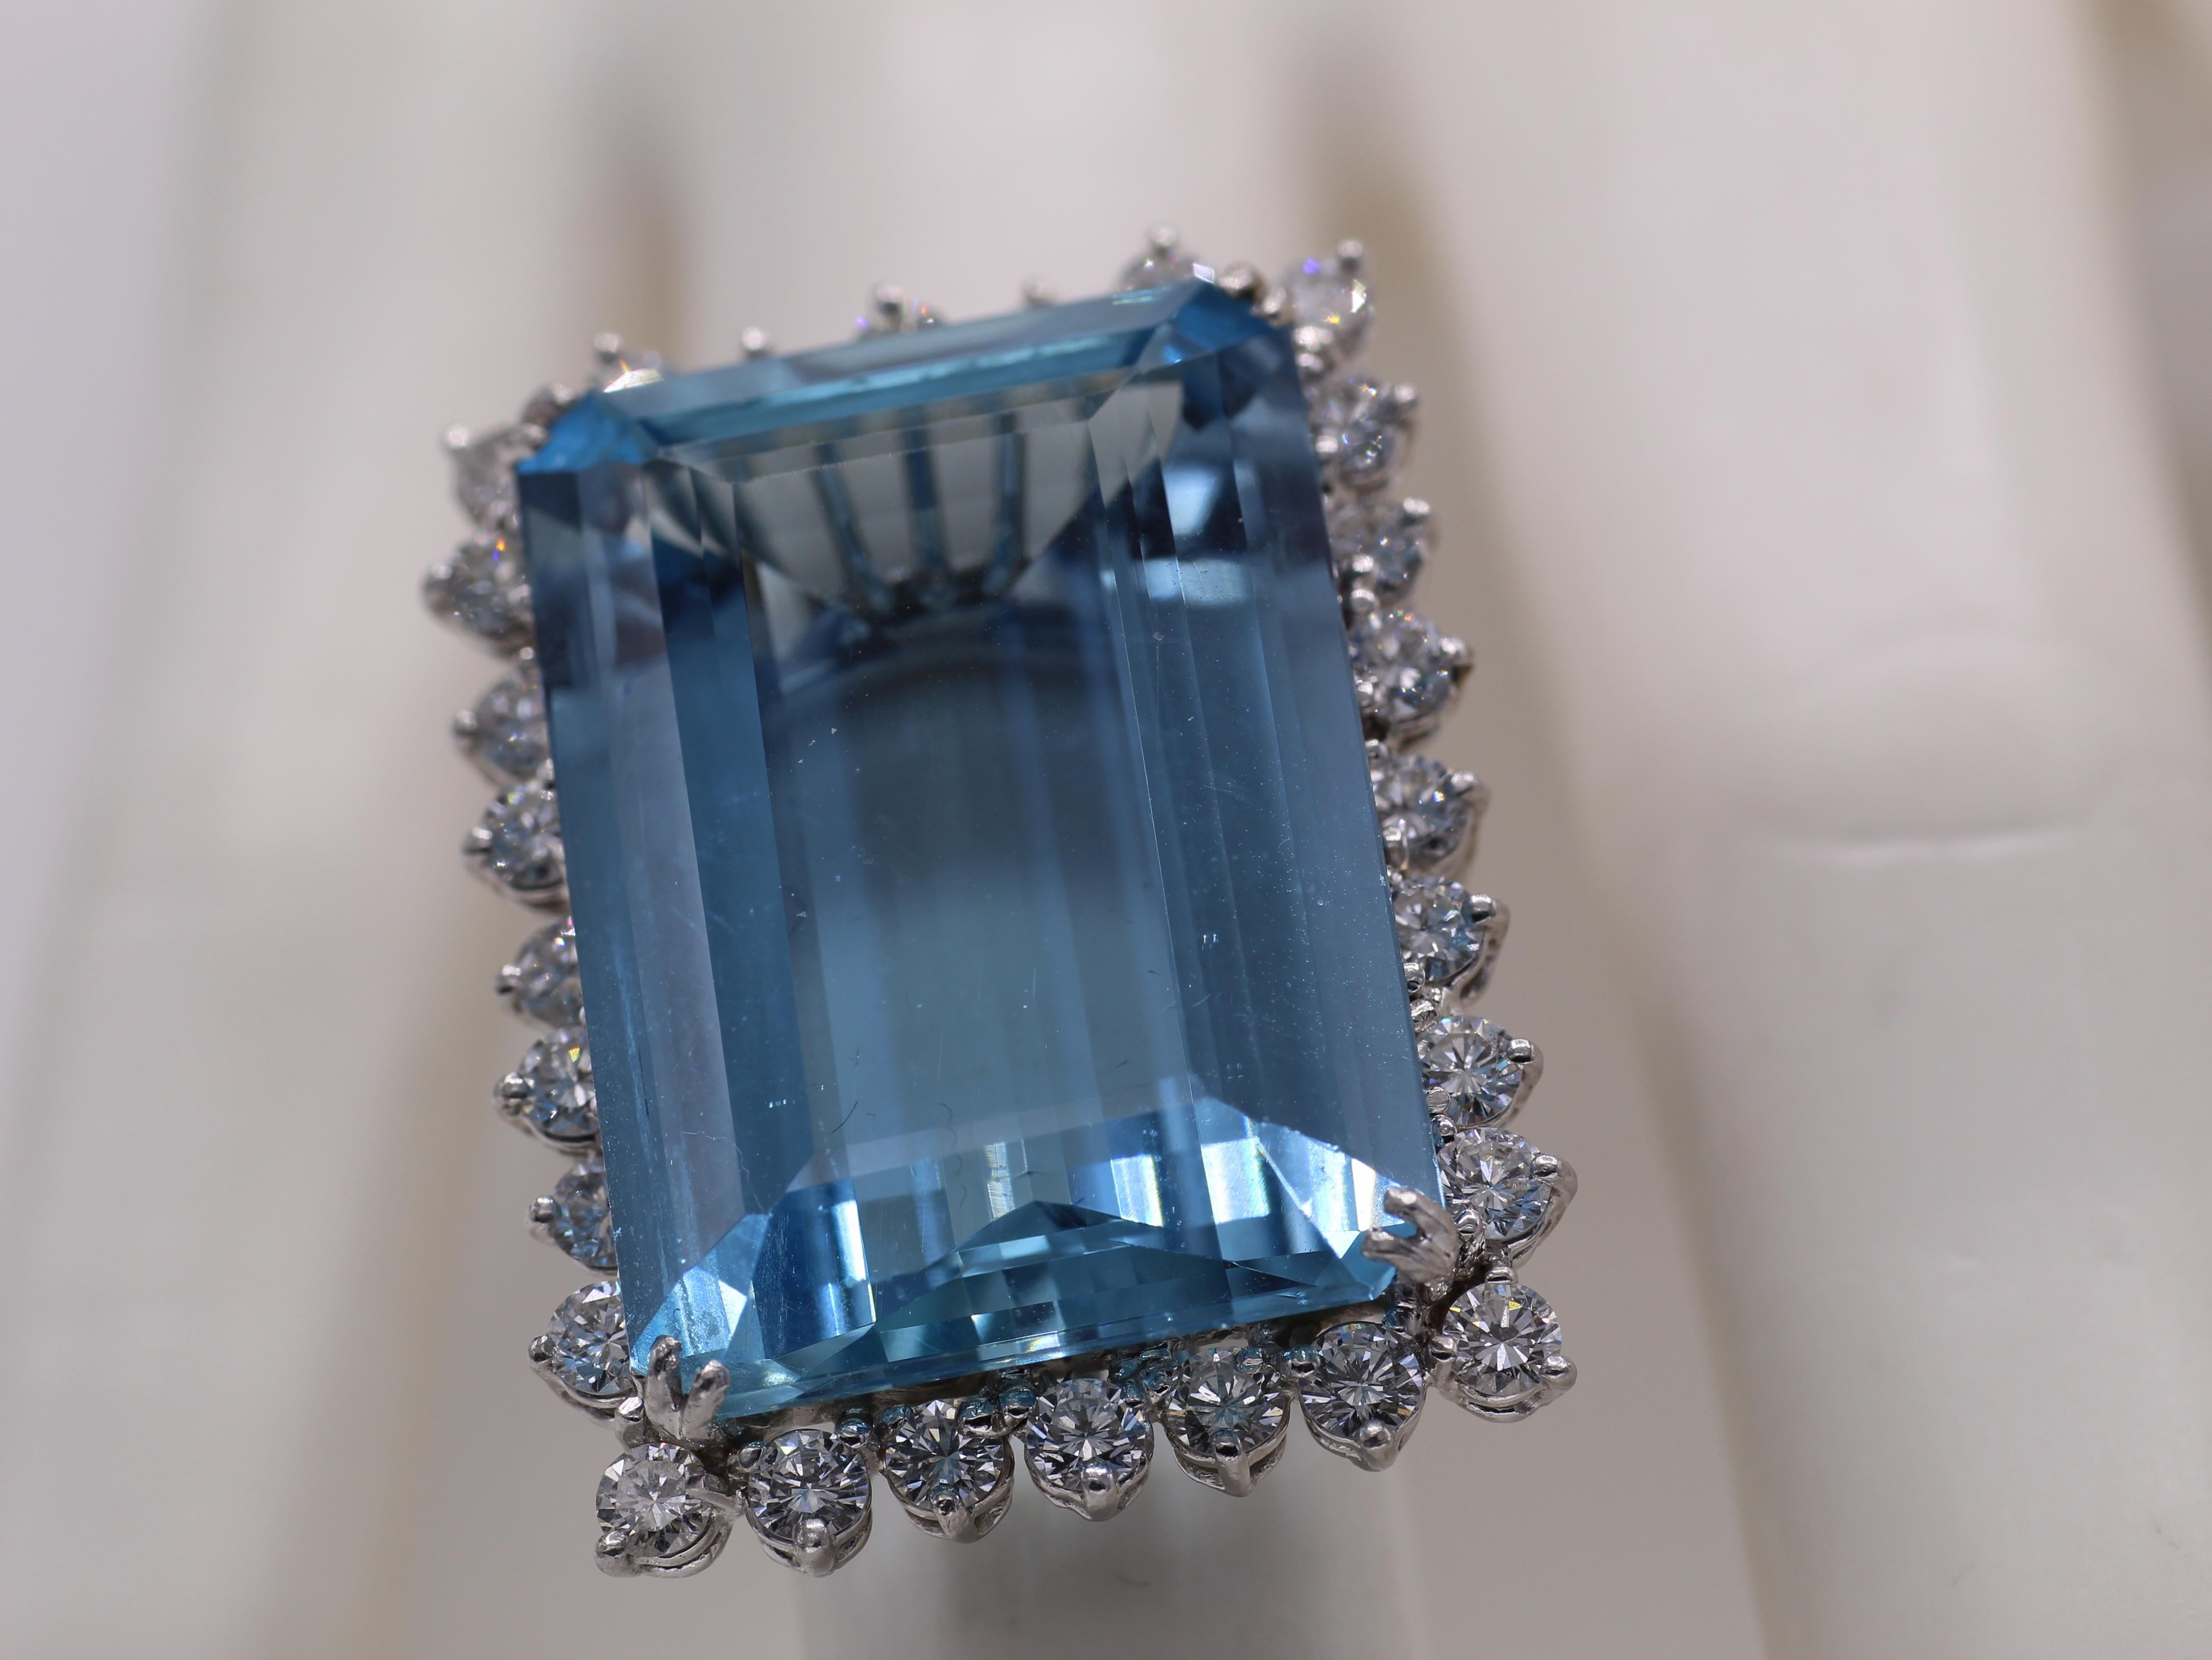 A gorgeous perfectly cut rectangular deep sky-blue Aquamarine is the centerpiece of this well handcrafted 1960s cocktail ring. The Aquamarine is measured to weigh approximately 36 carats and appears much larger than gemstones of similar weight, due